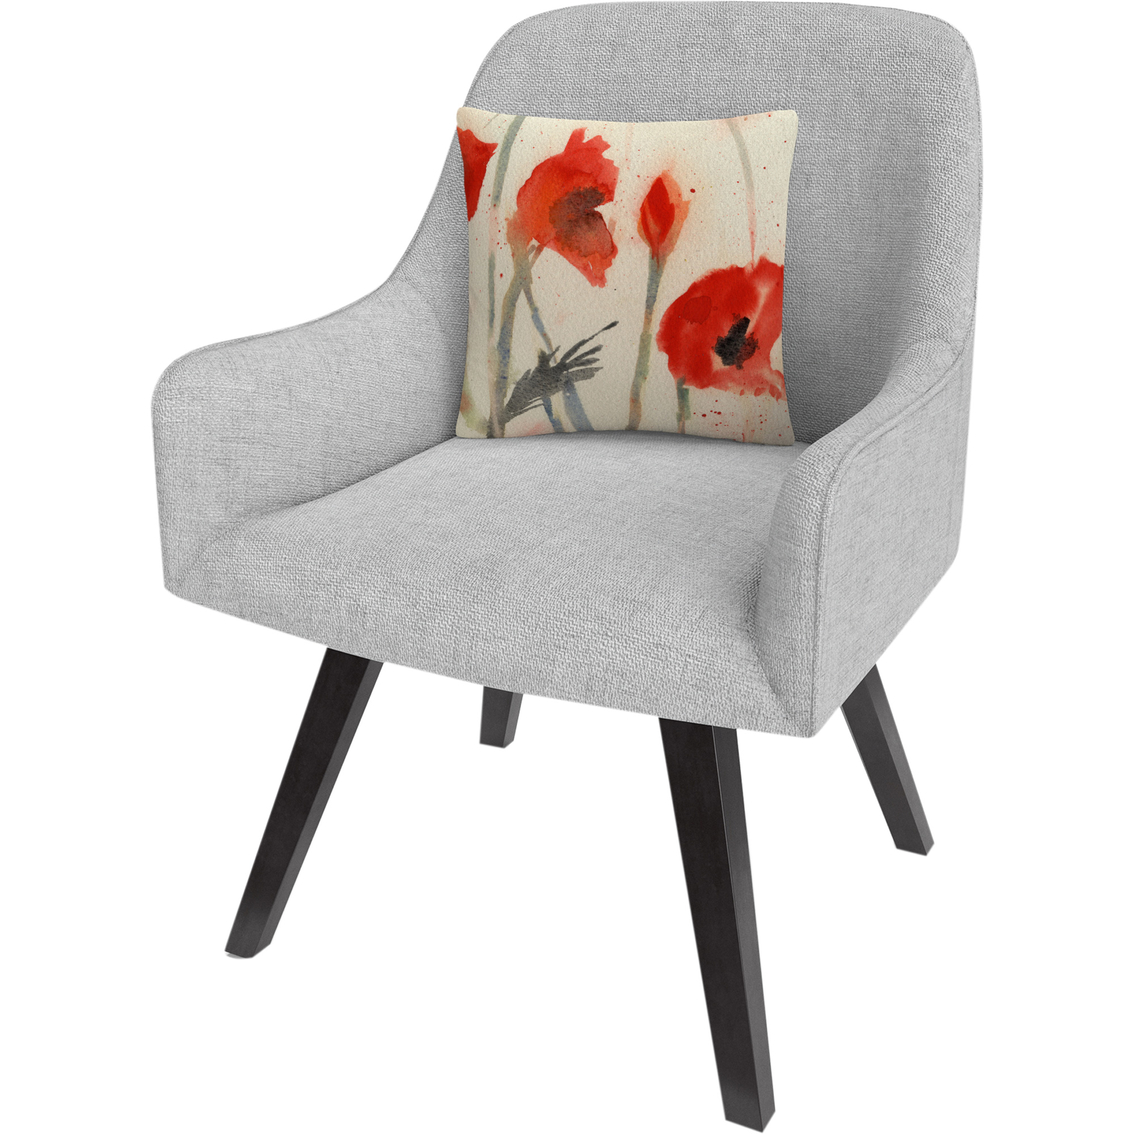 Trademark Fine Art Red Poppy Light Floral Abstract Decorative Throw Pillow - Image 2 of 2